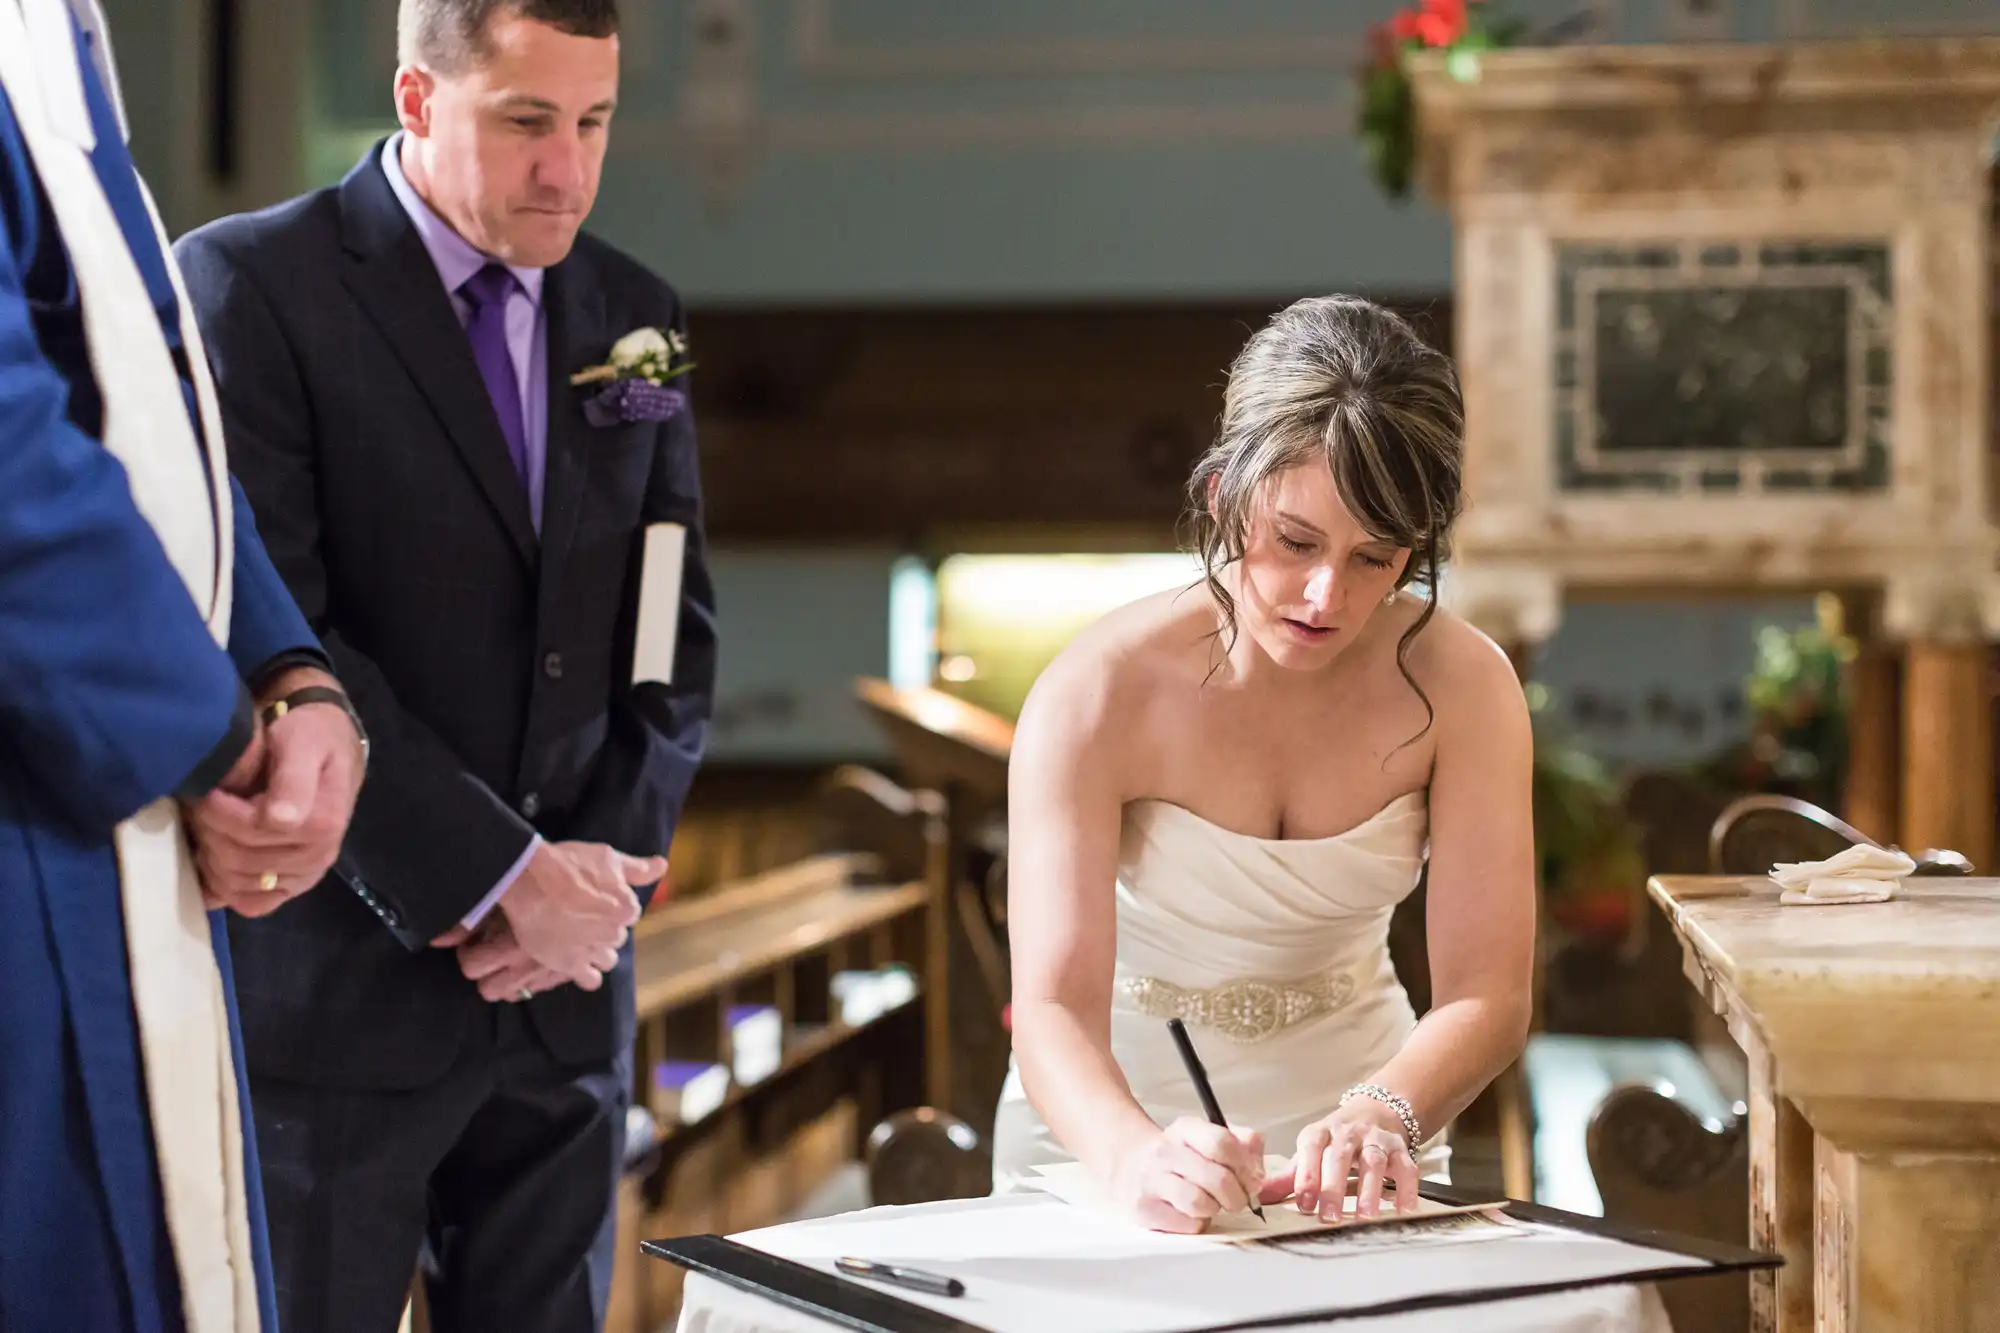 A bride in a strapless dress signs a document at her wedding ceremony, with an onlooking man in a suit and purple boutonniere.